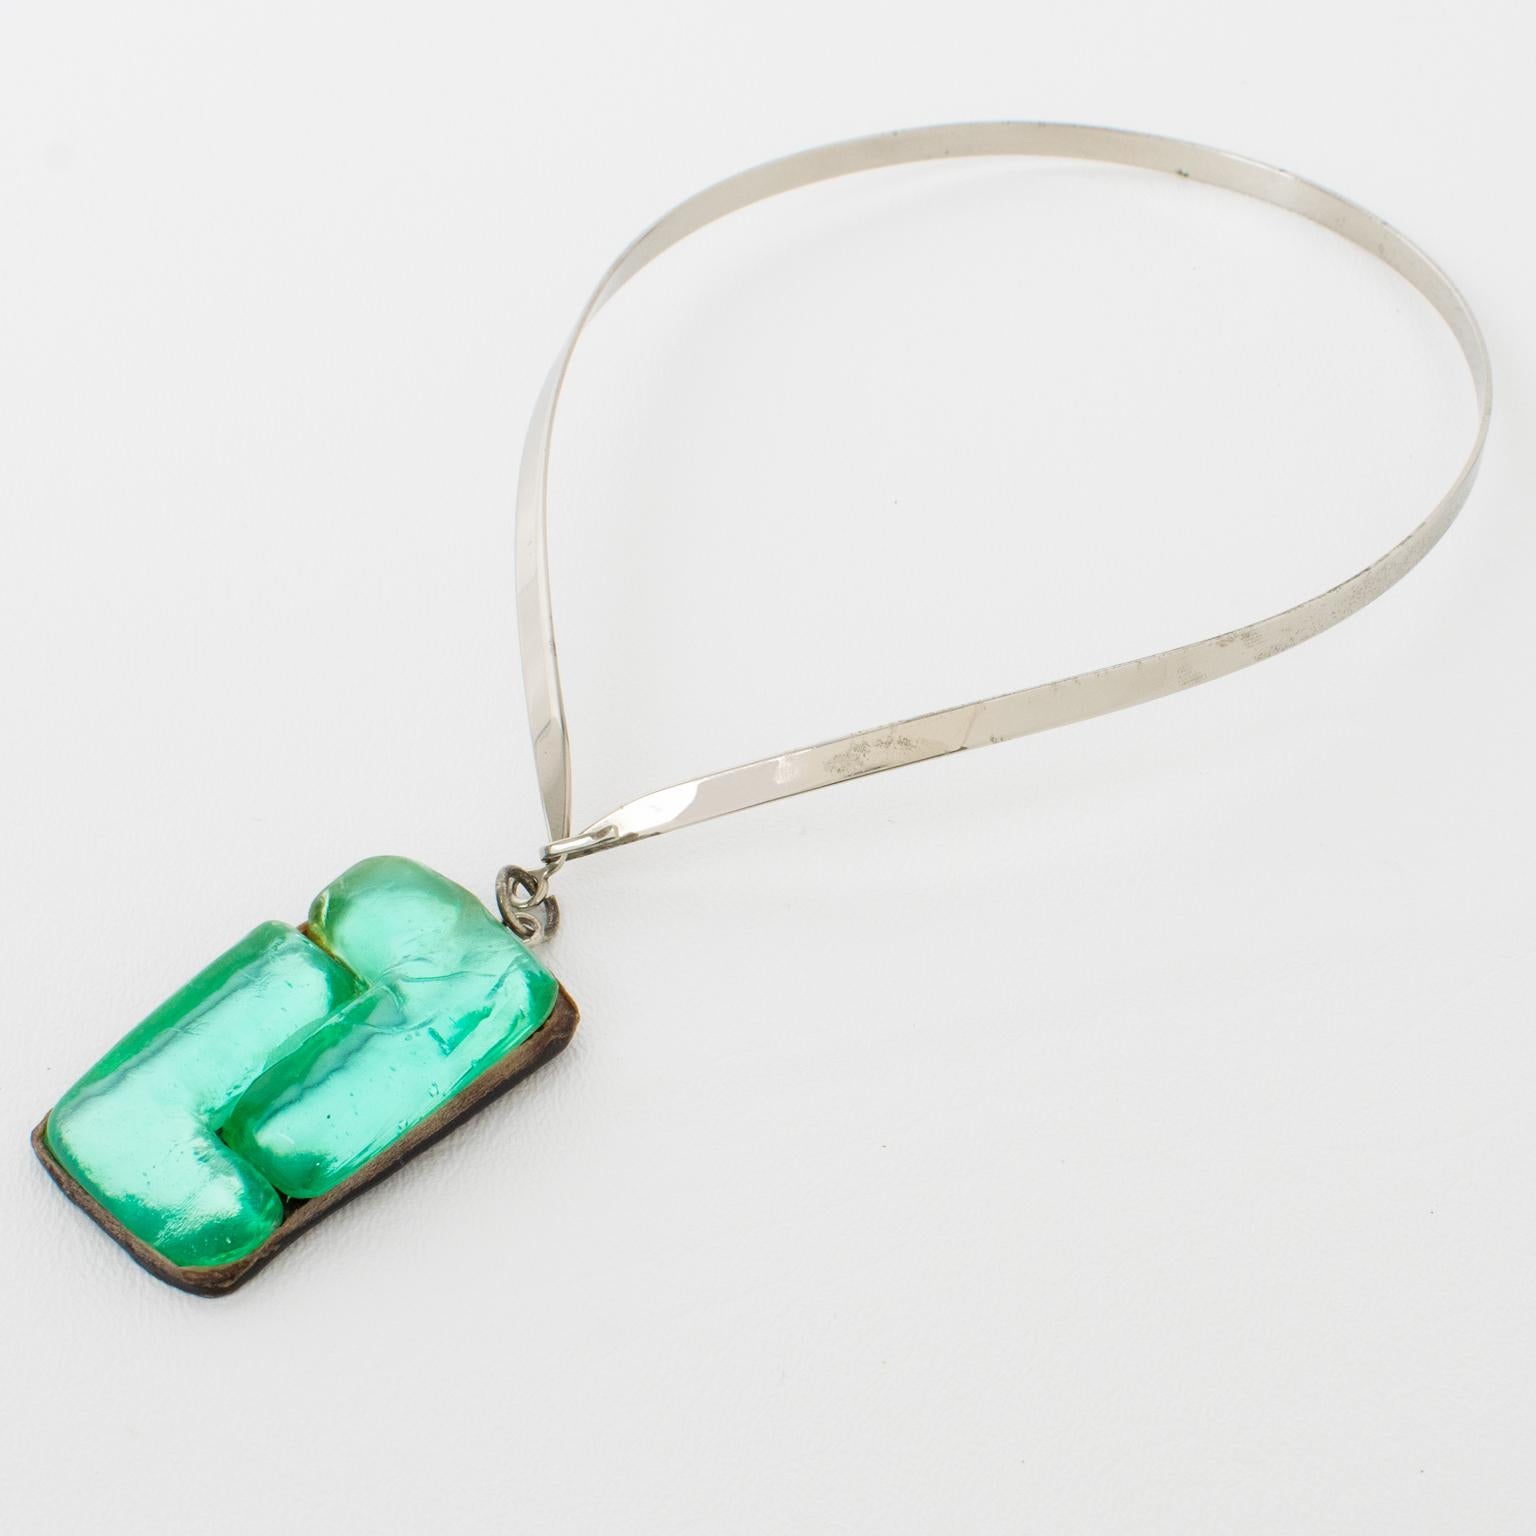 Monique Vedie Paris Turquoise Talosel Resin and Chrome Modernist Necklace In Good Condition For Sale In Atlanta, GA